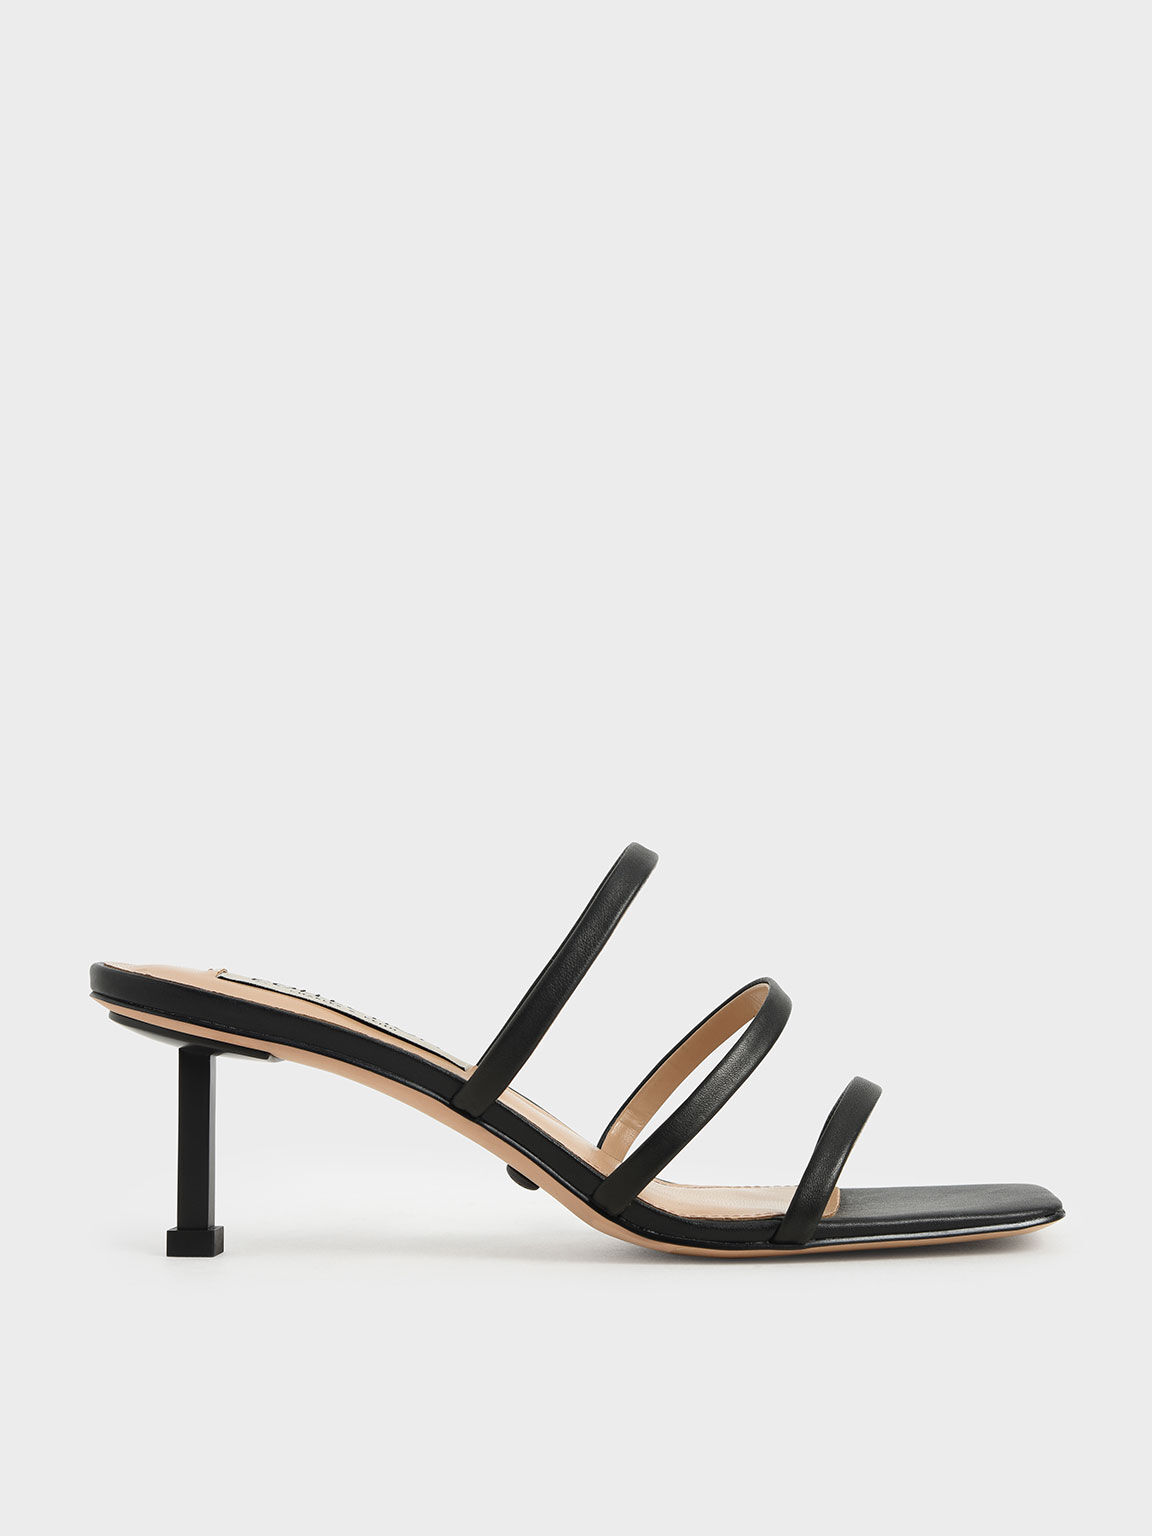 Strappy Heeled Mules, Black, hi-res